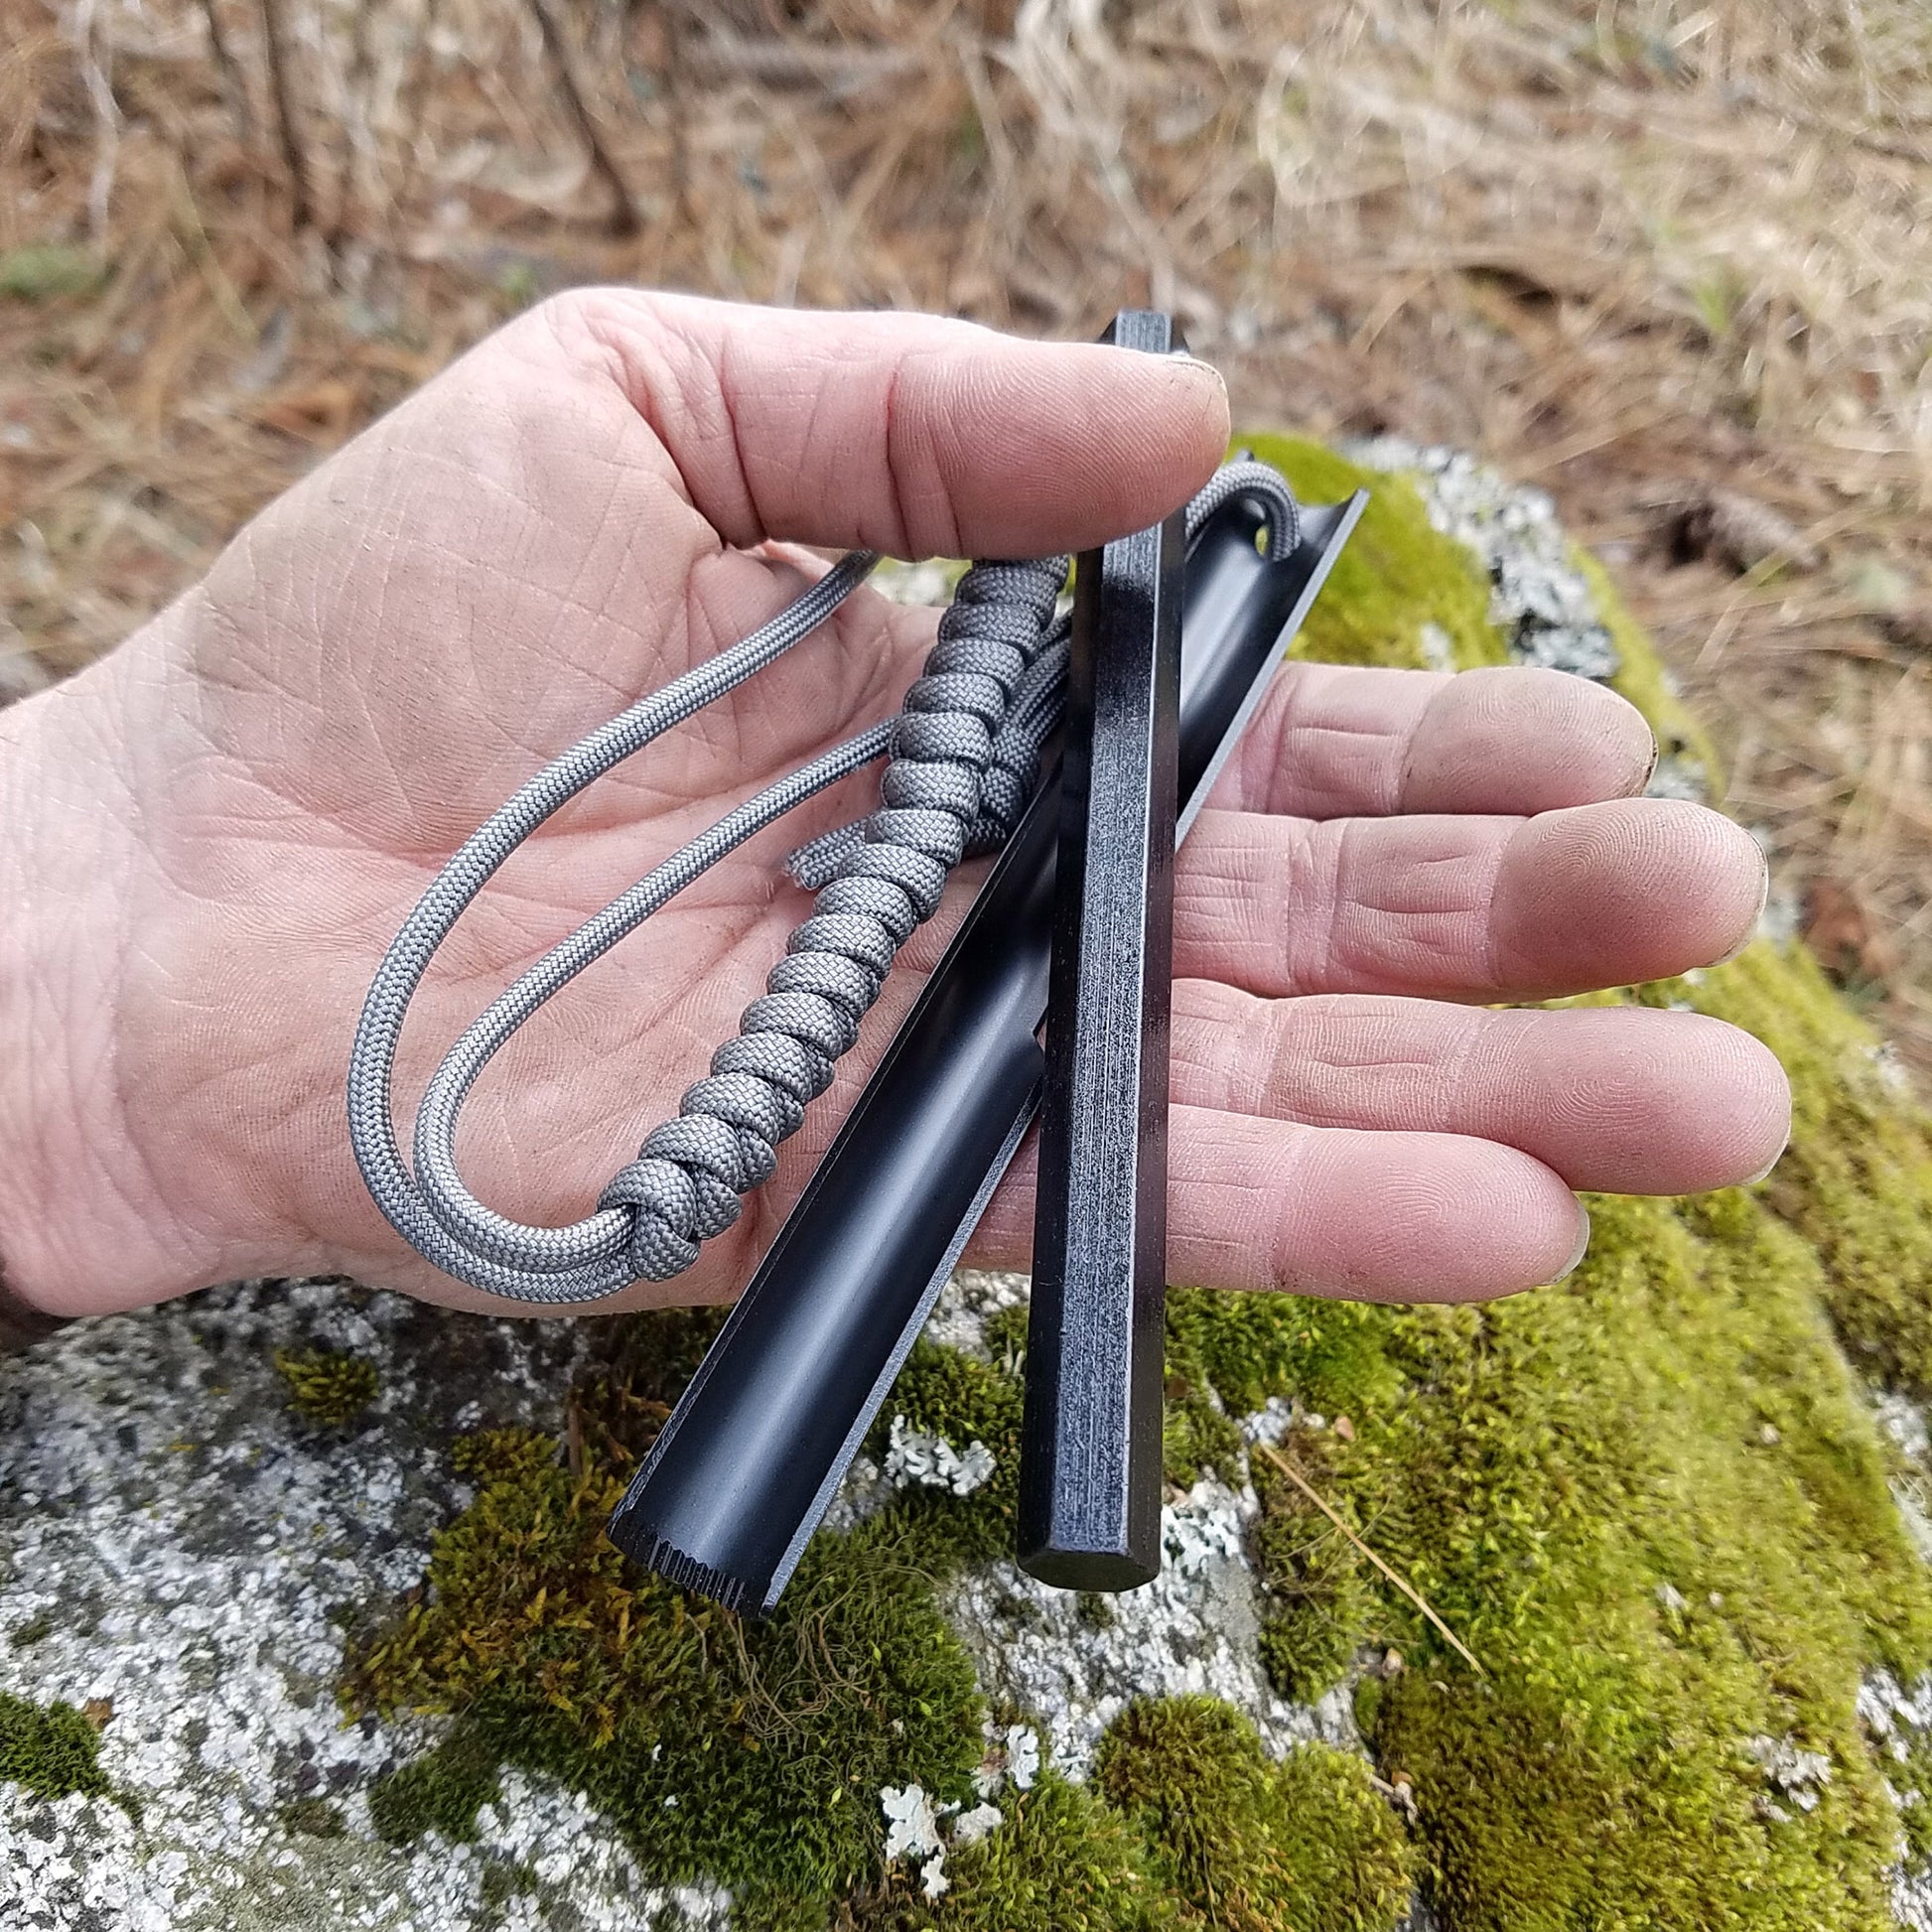 The PyroStryke Hexalite Ferro Rod fire starter is the ultimate emergency fire starting tool fits nicely in the palm of your hand for easy storage..